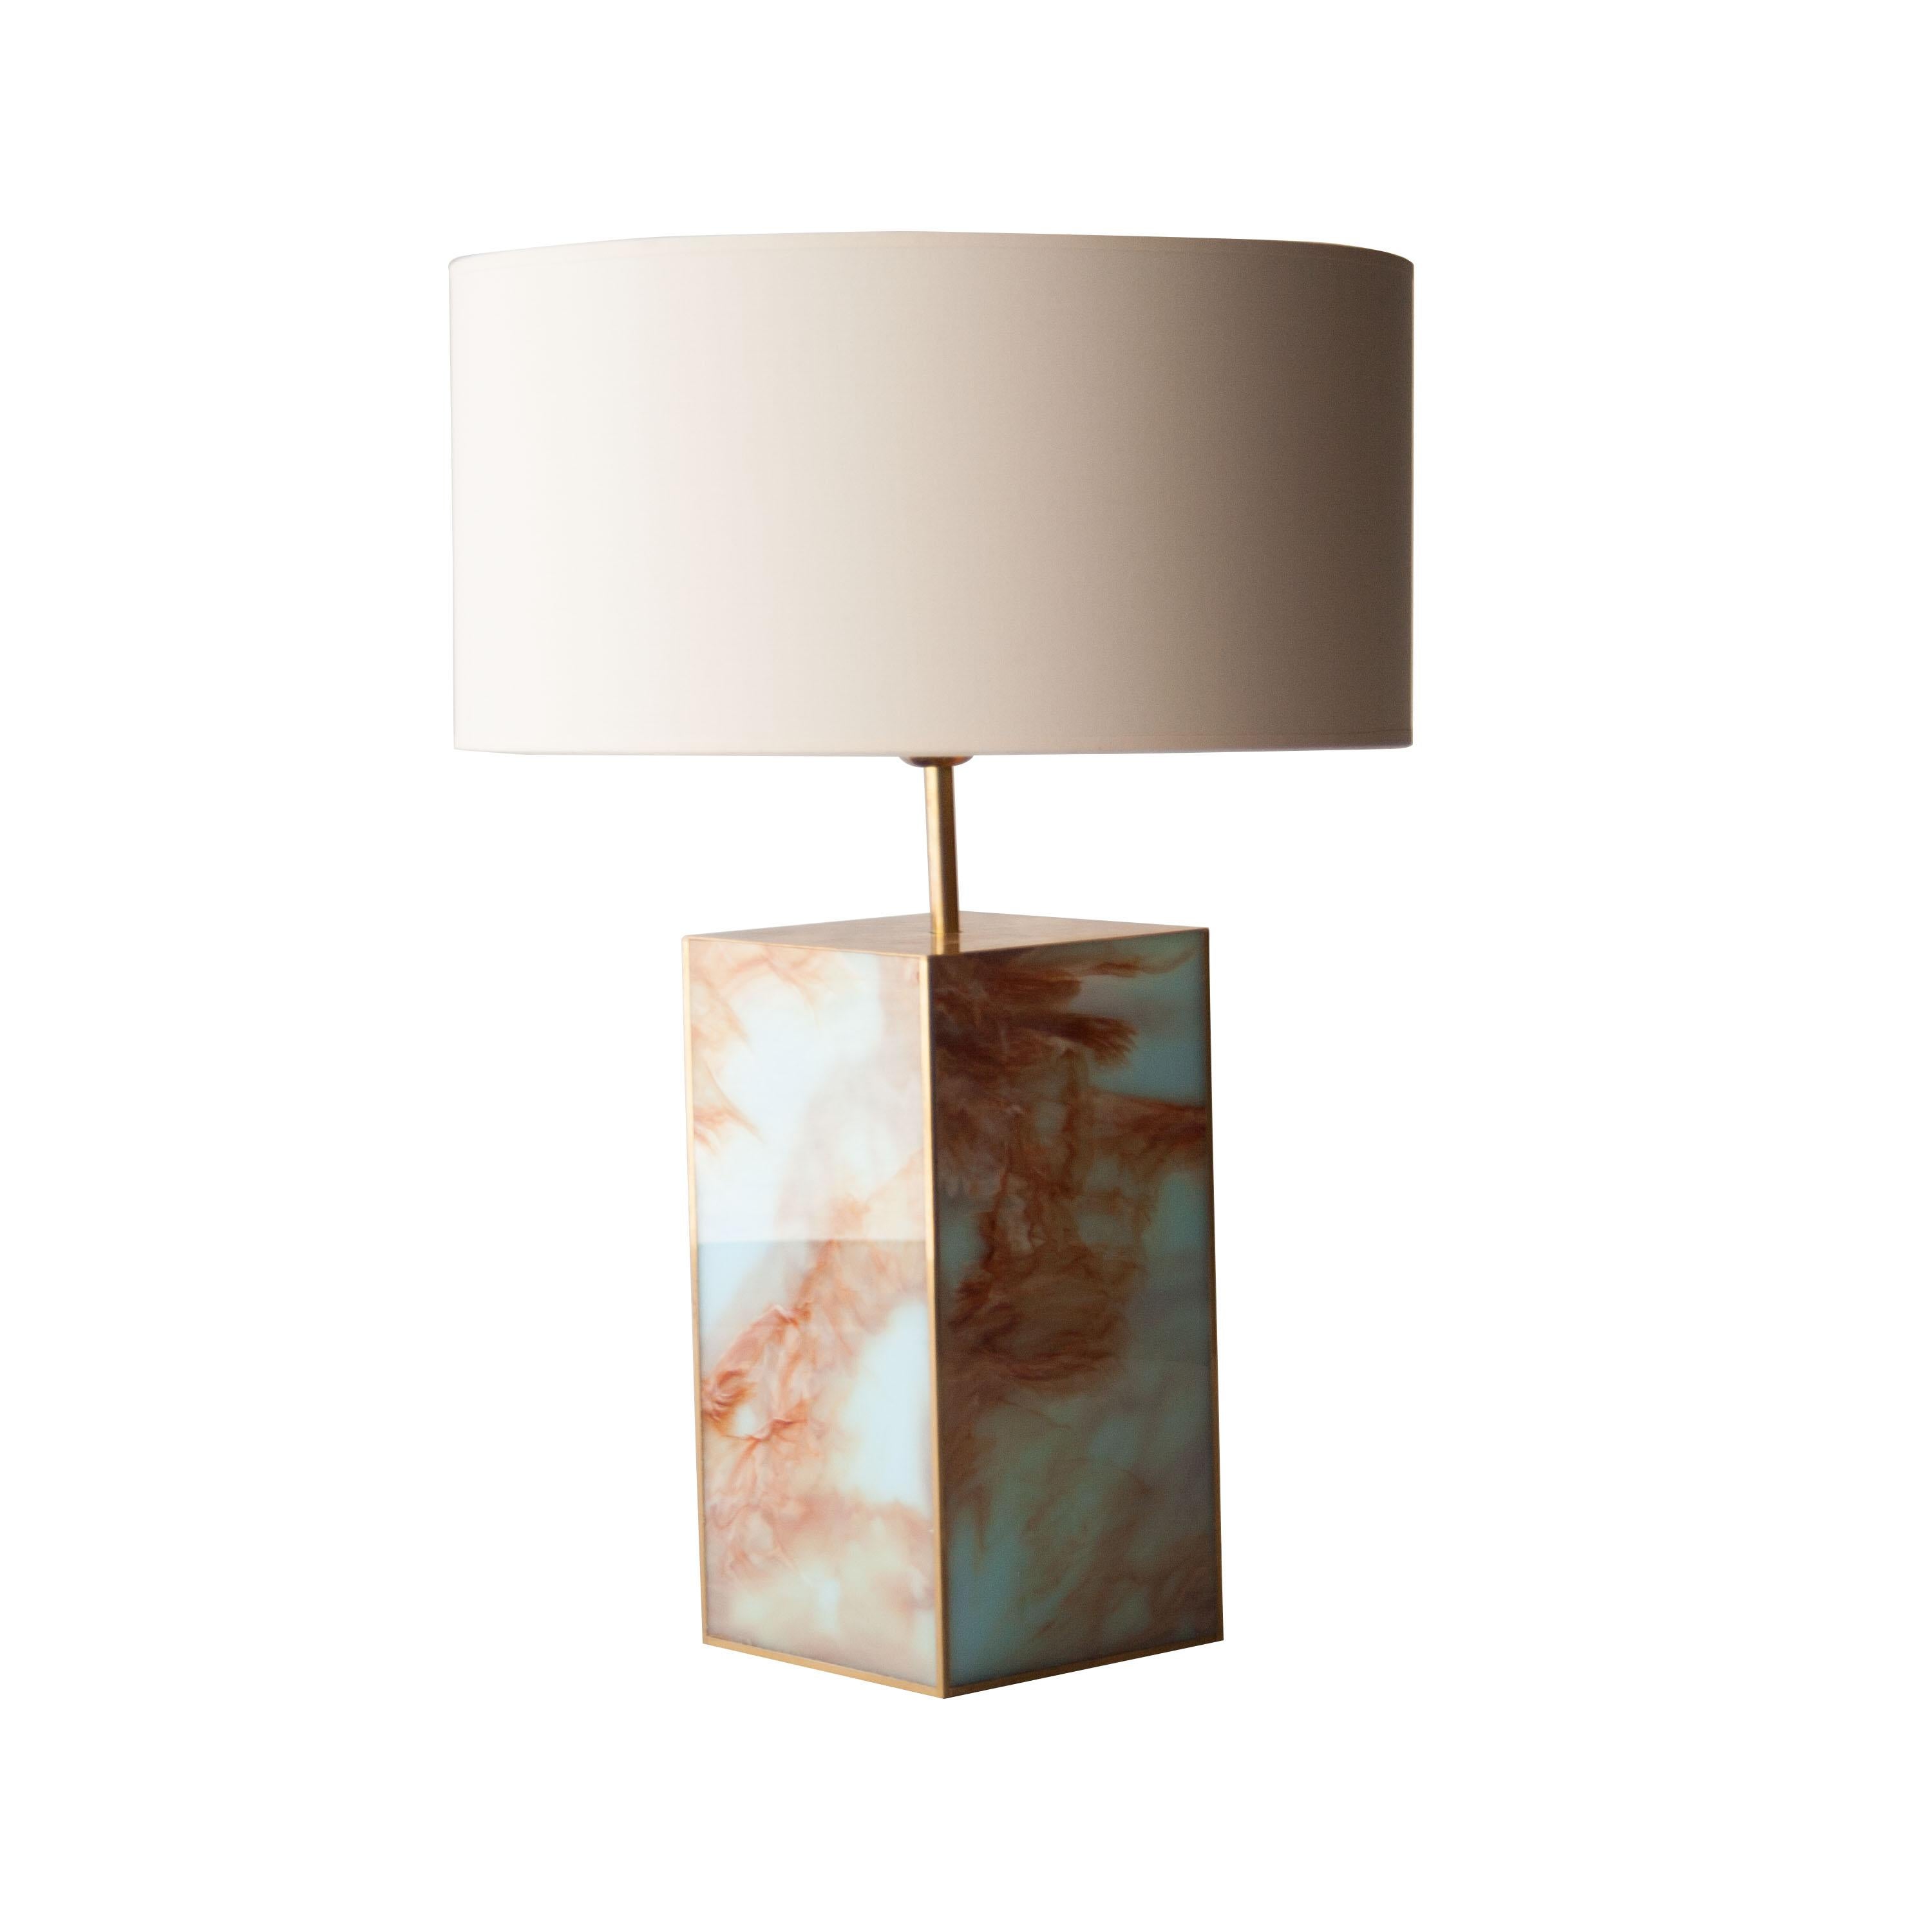 Pair of table handmade lamps with a methacrylate base colored in cyan and orange, with brass details and a beige screen.